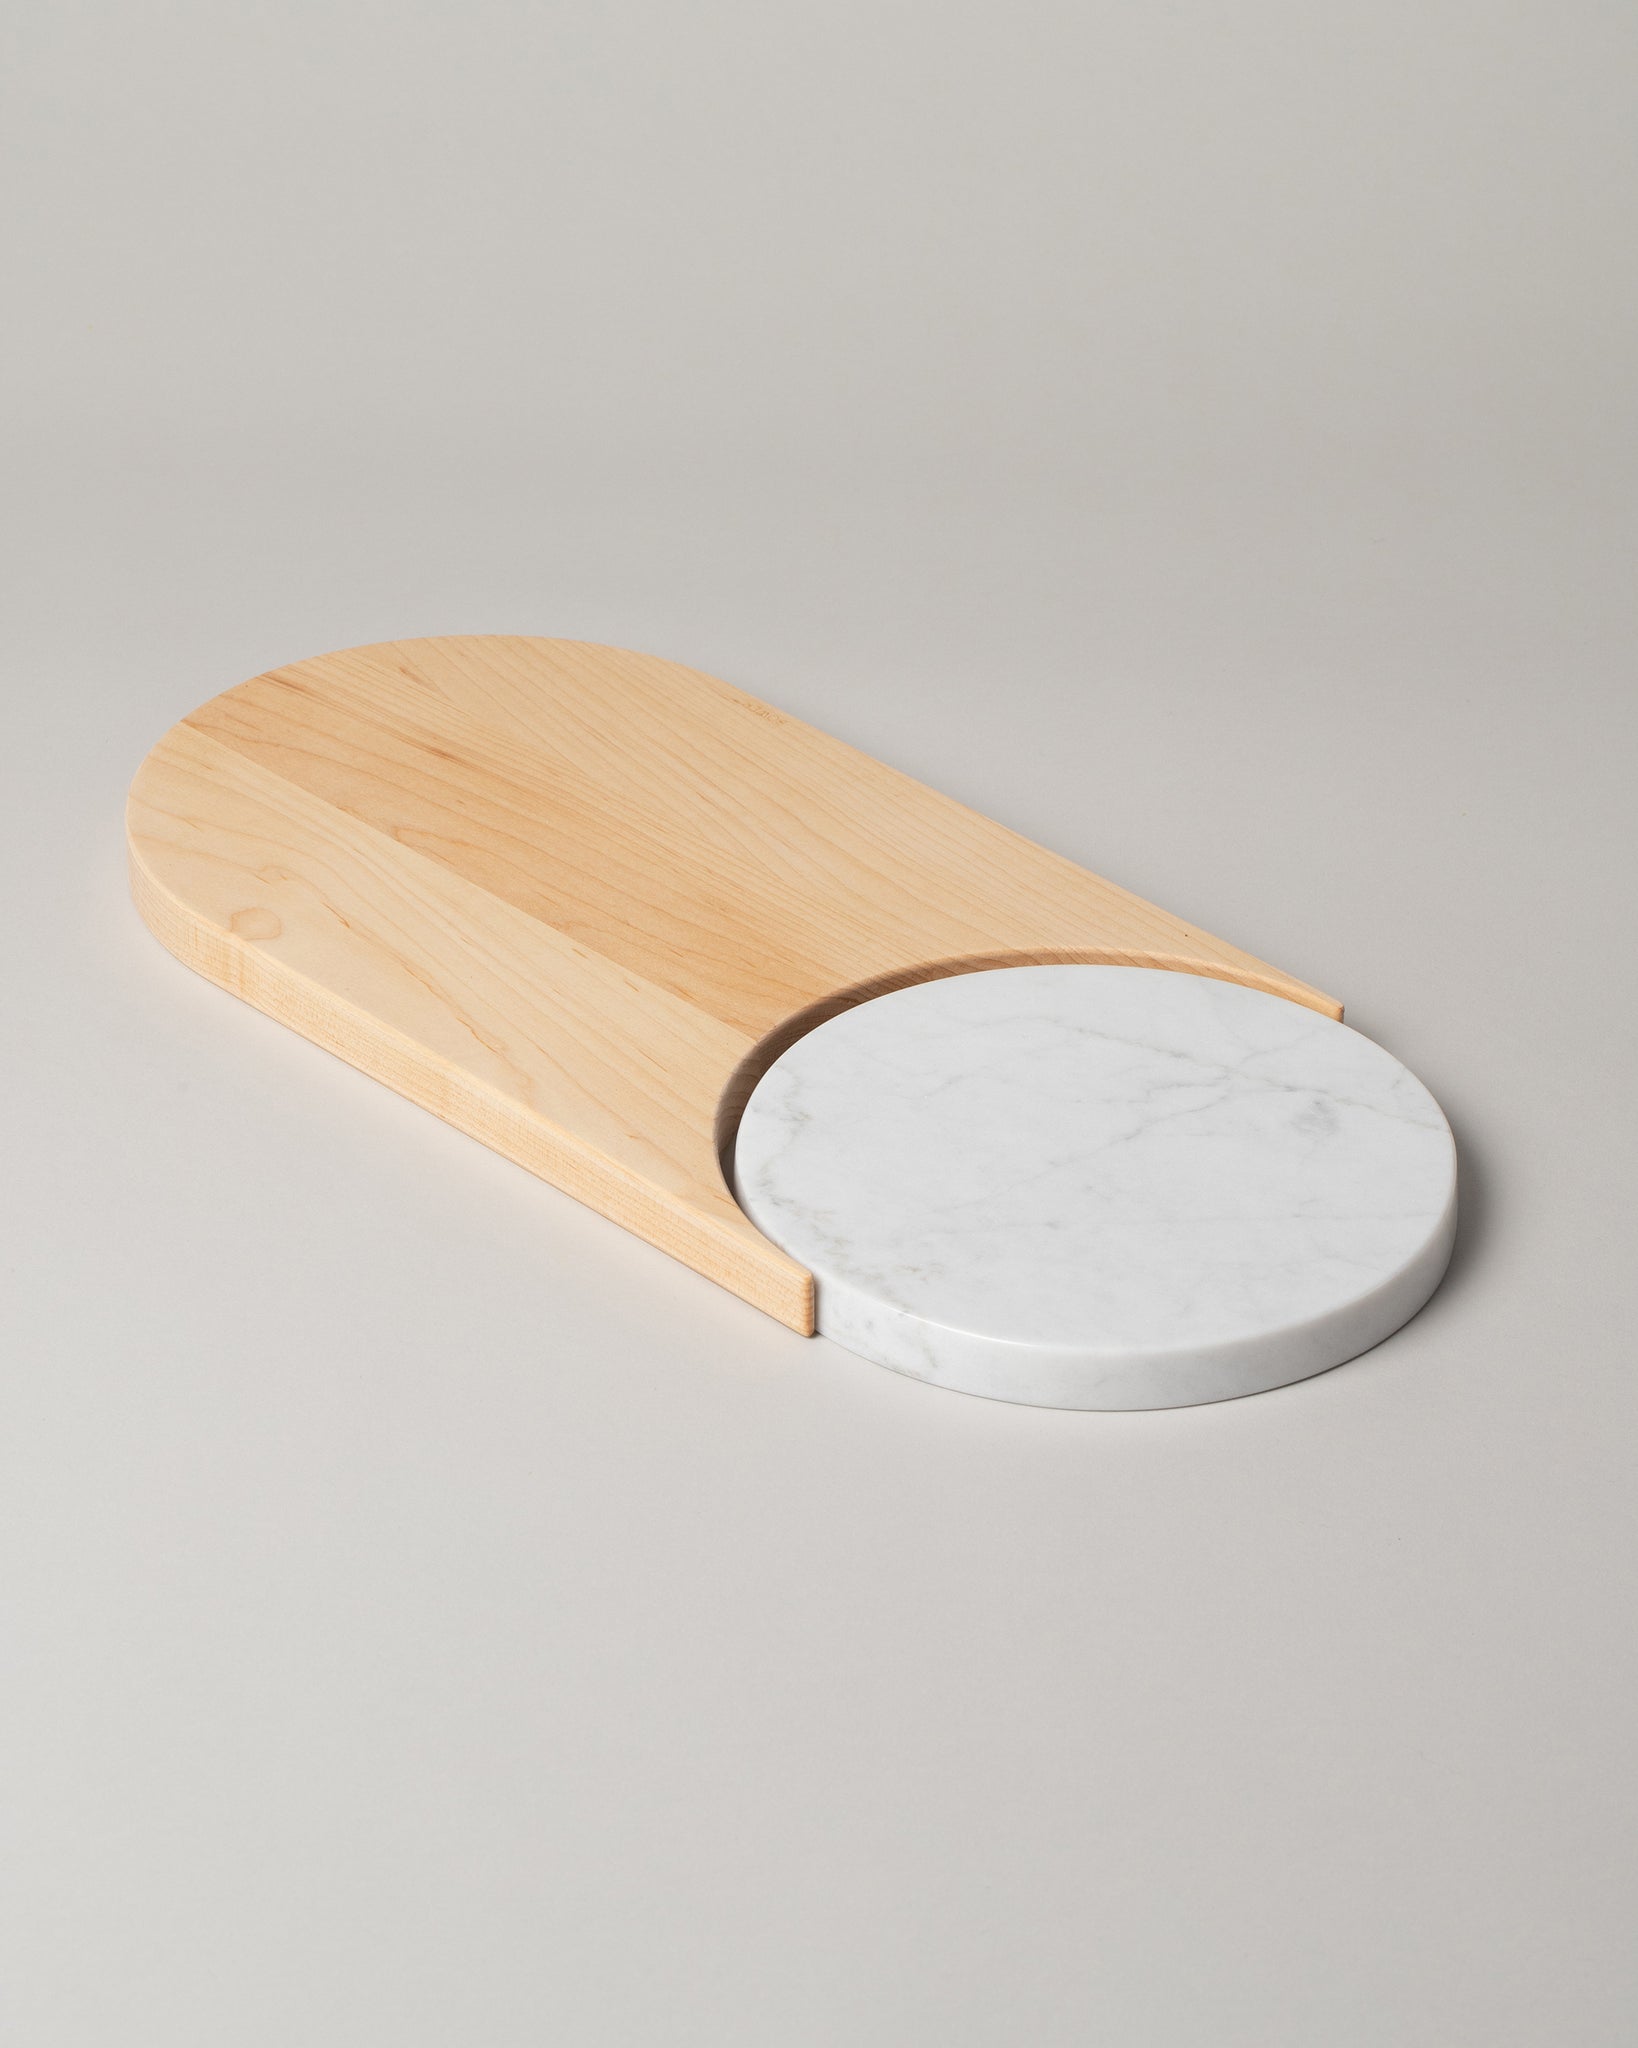 Bower Studios Collection serving tray on a neutral-light background.